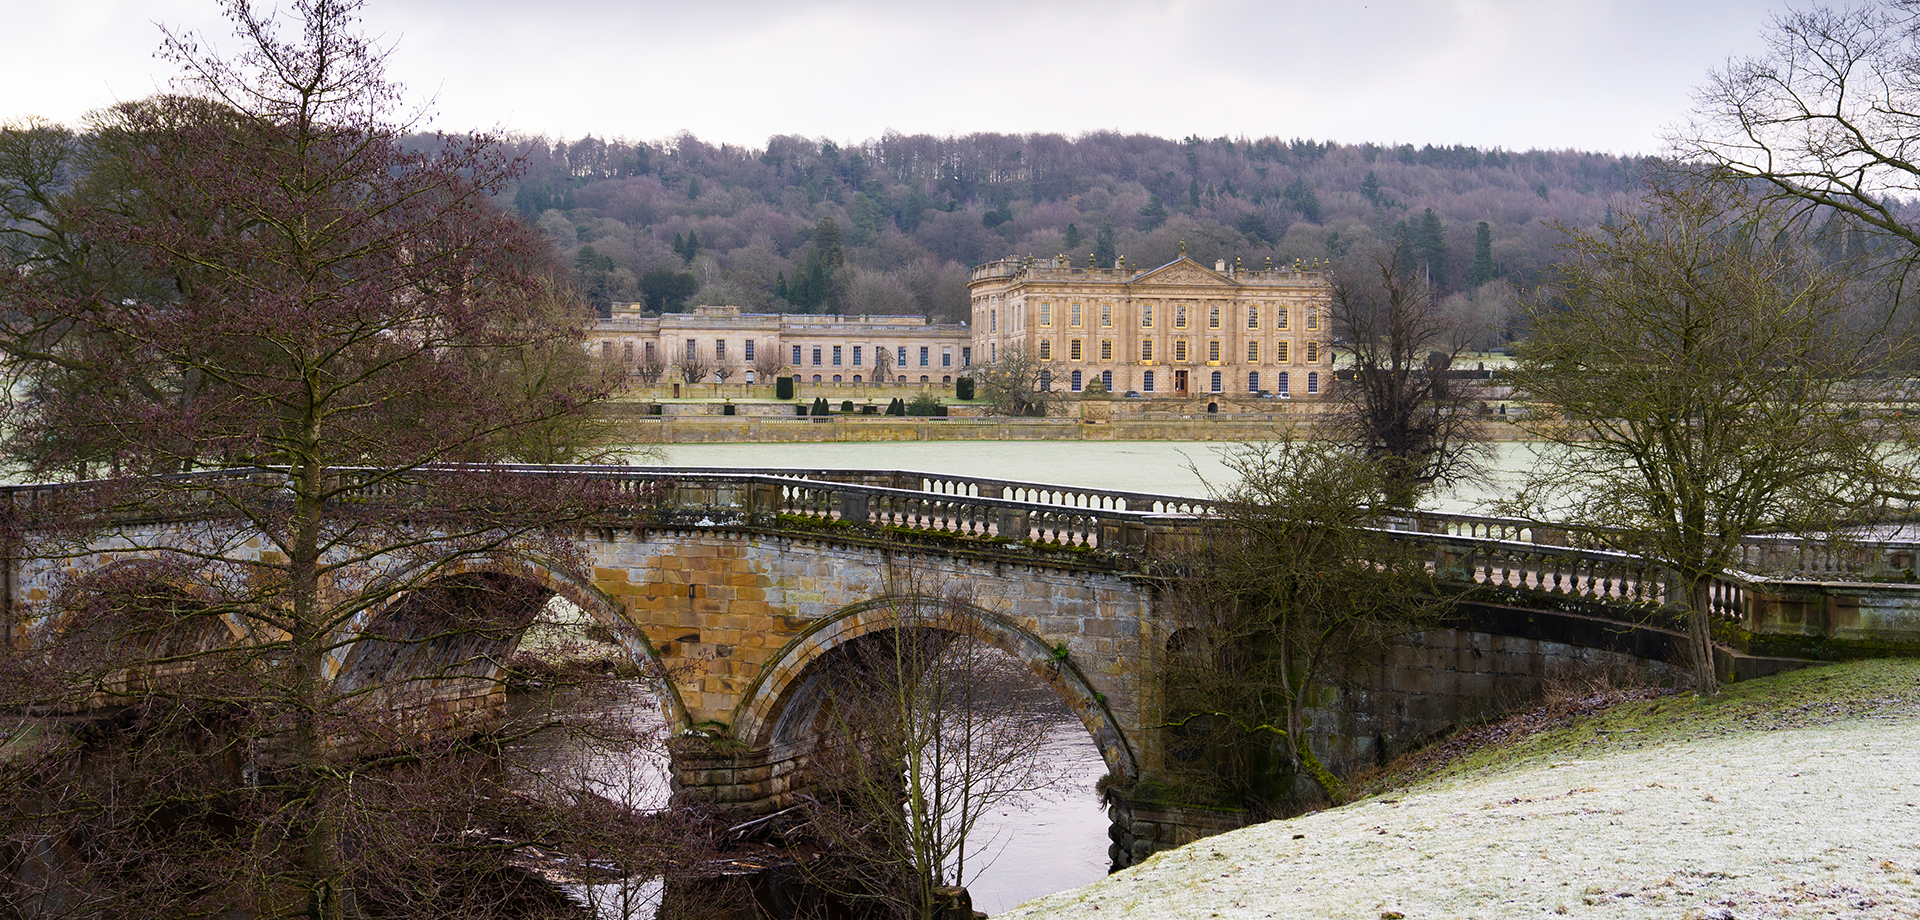 West front and Paines bridge in winter